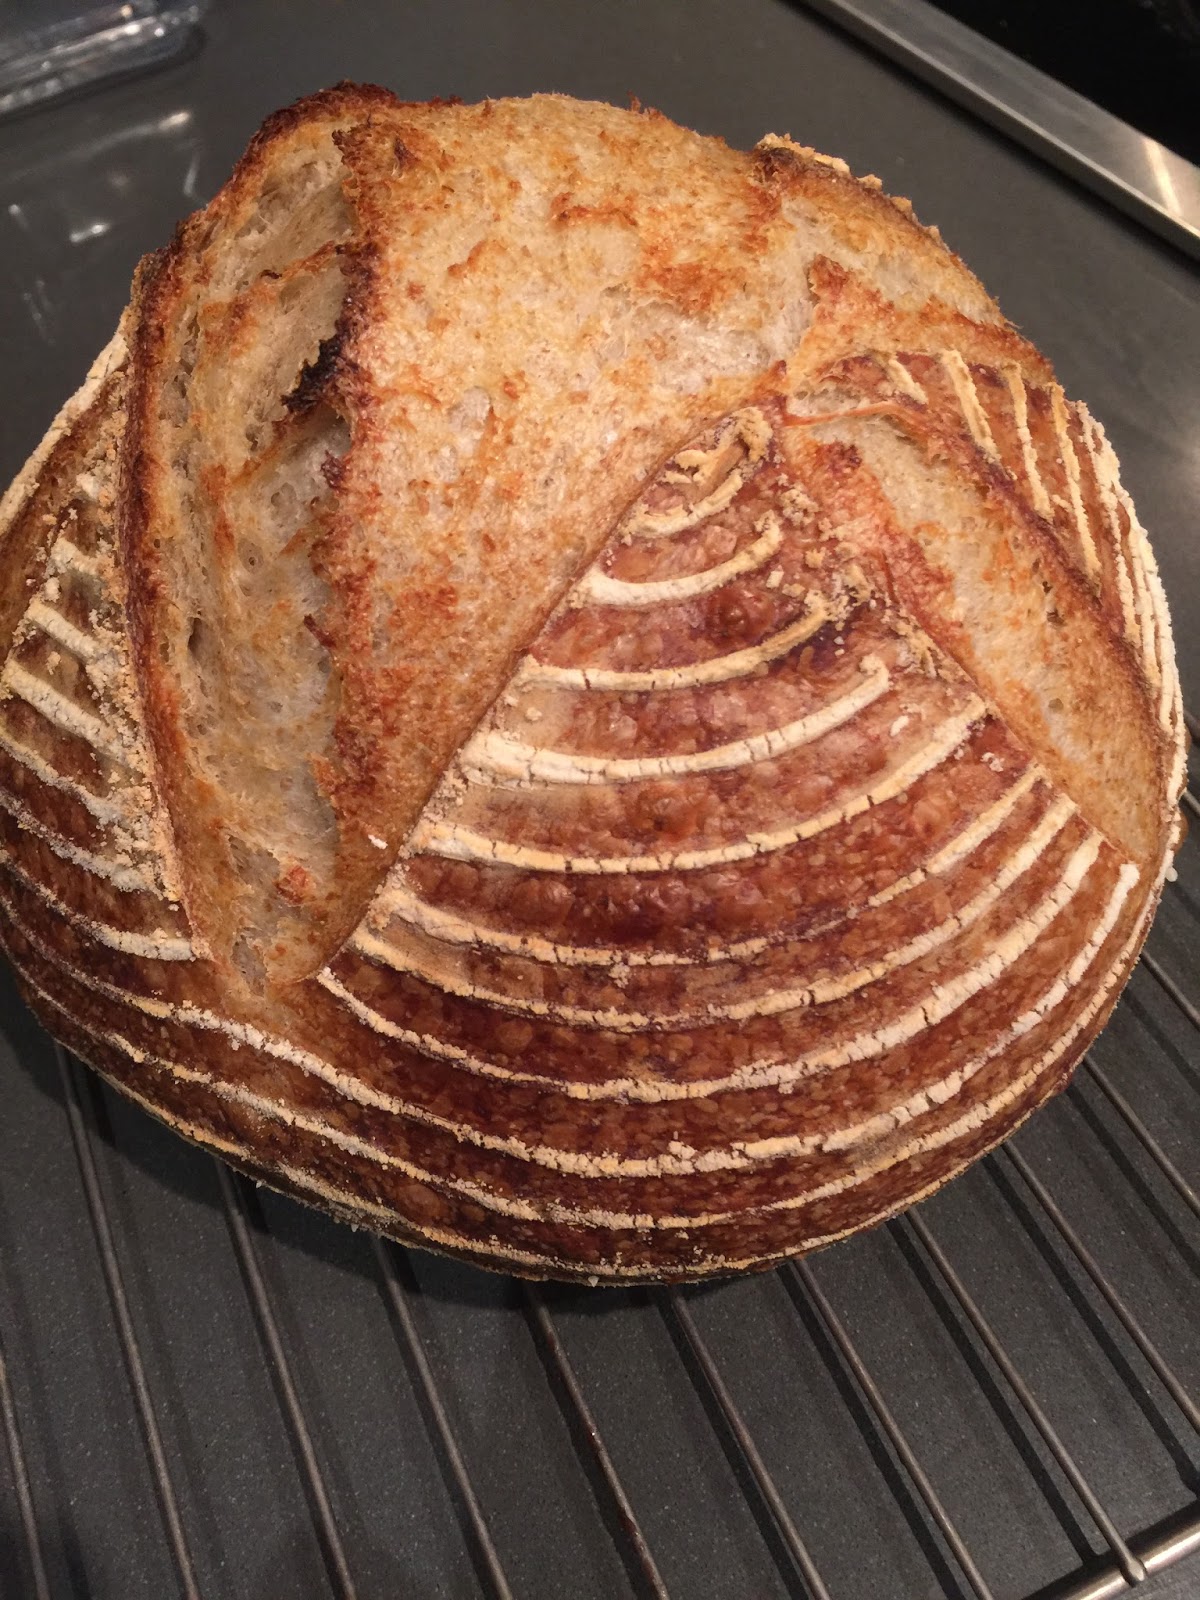 Bread-Making, Old-School, Artisan, and Beginner’s Luck . . .